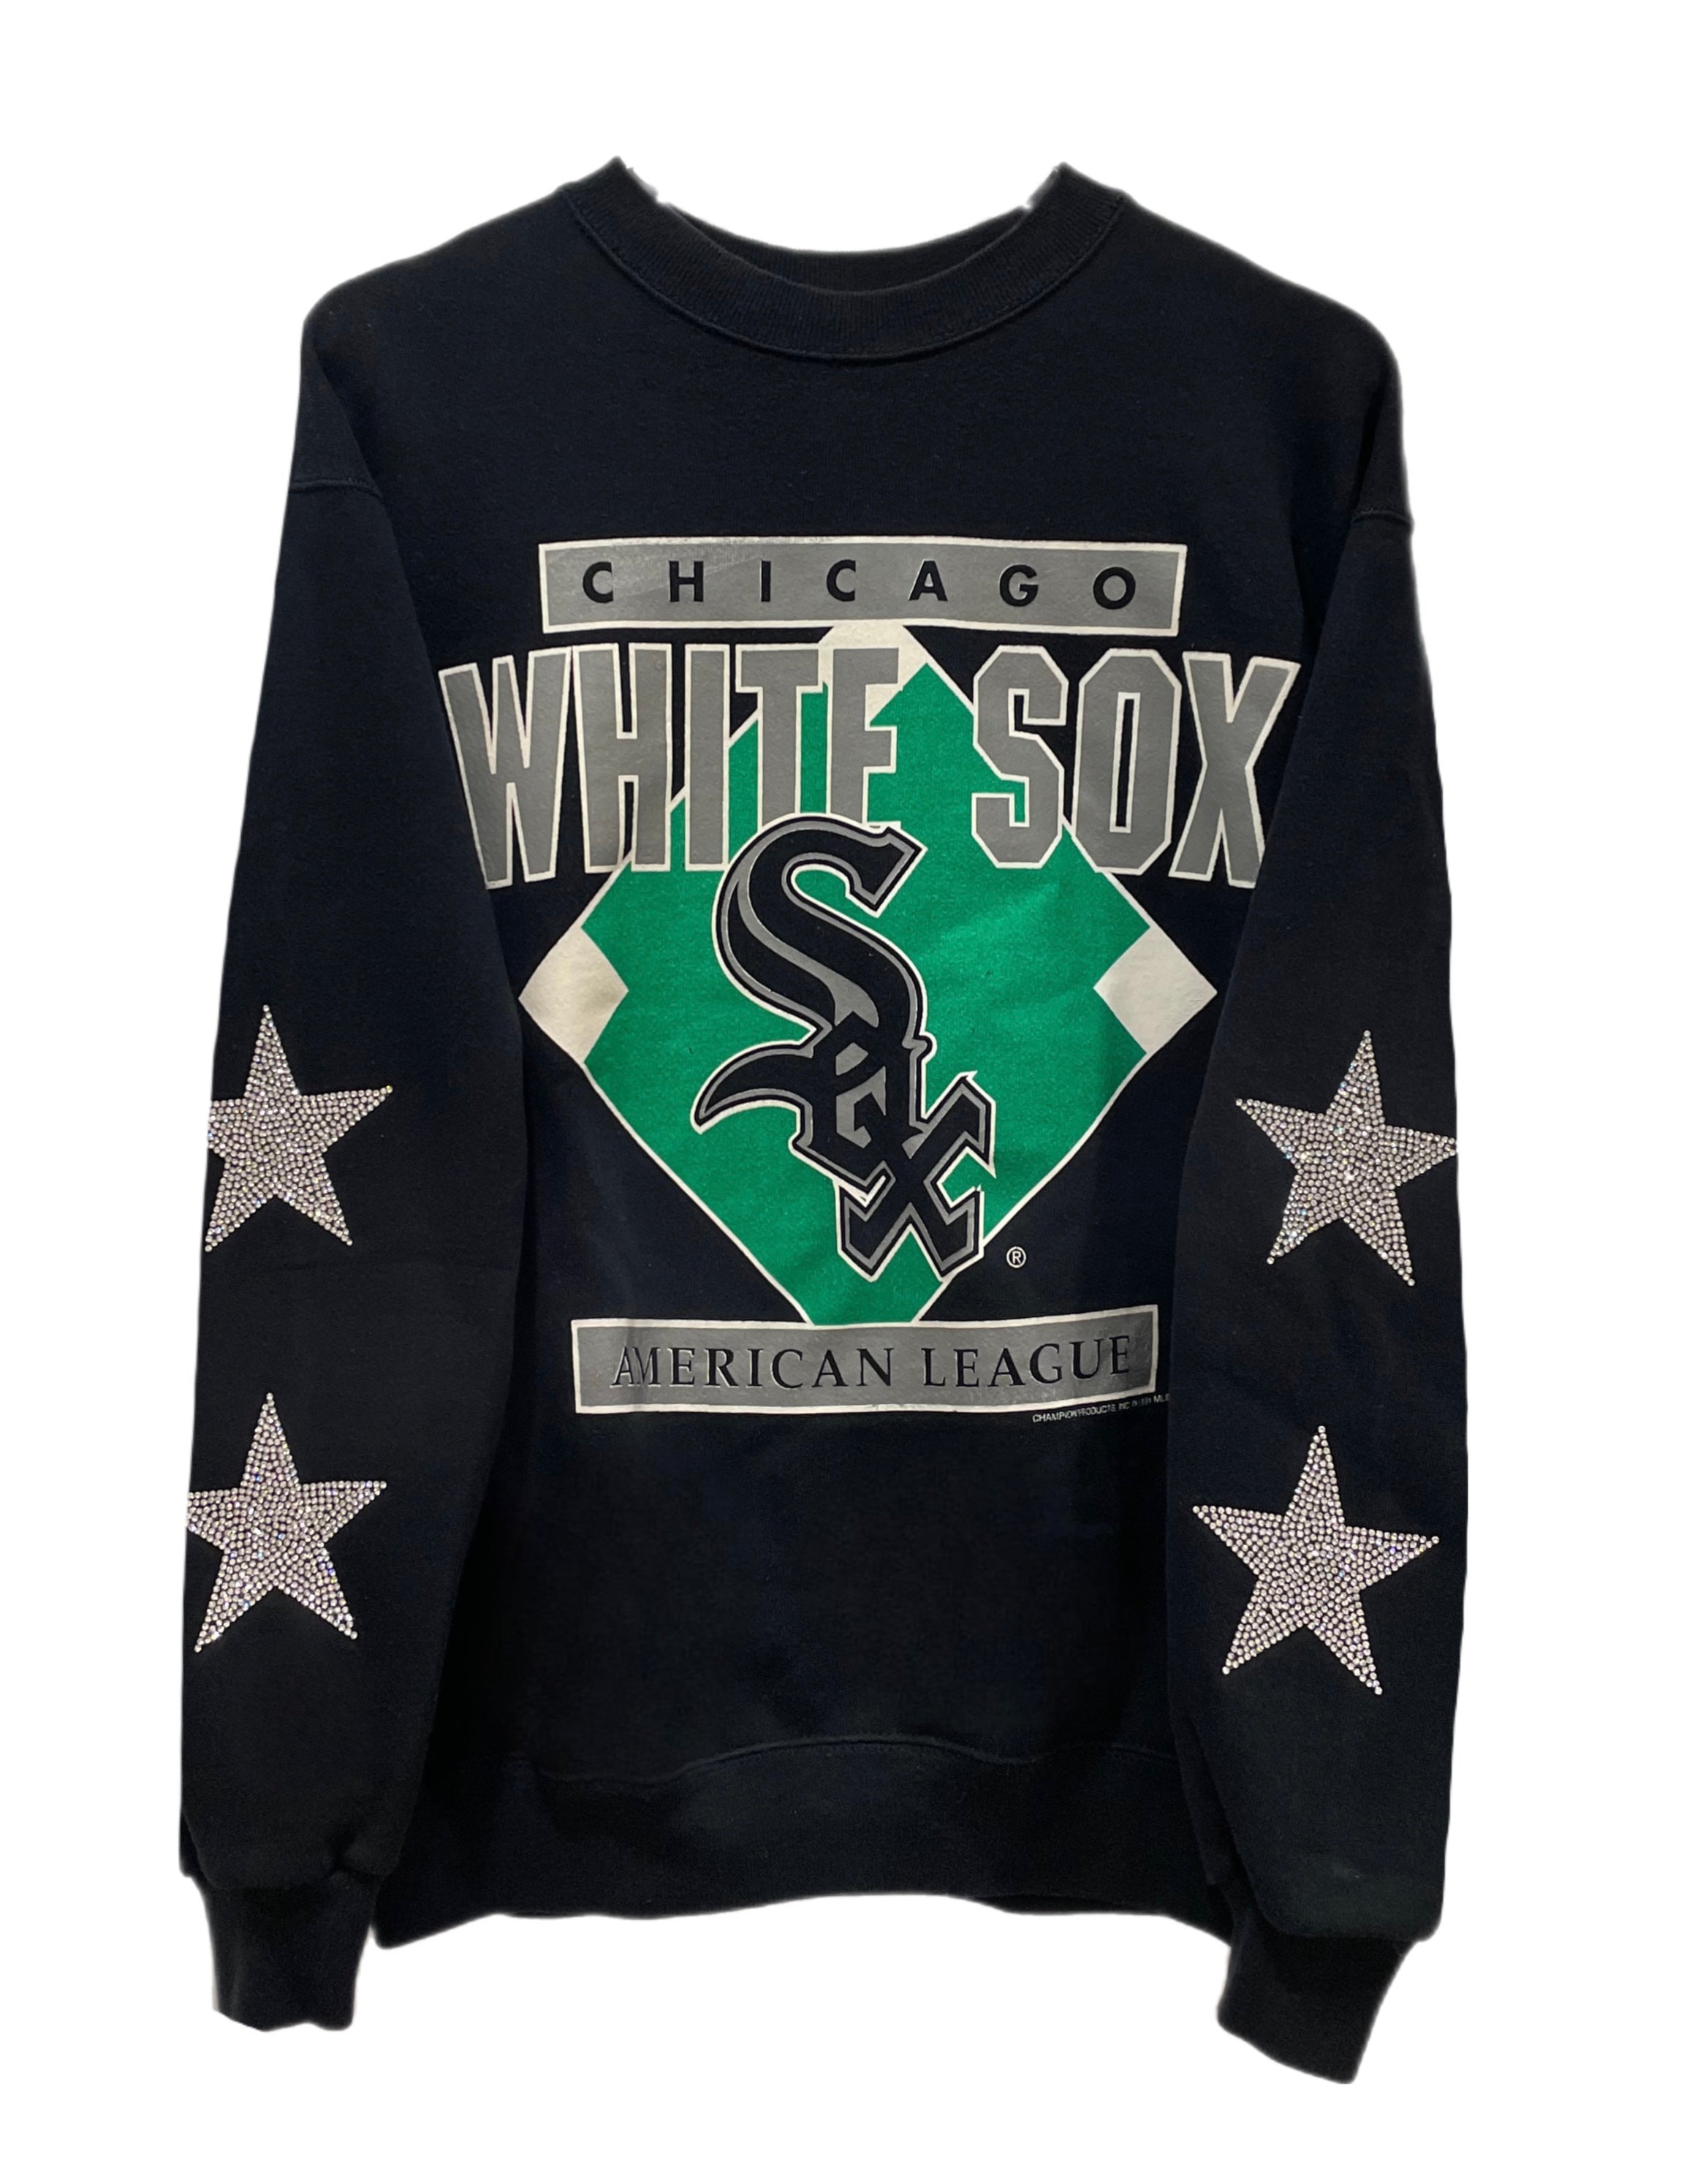 ShopCrystalRags Chicago White Sox, MLB One of A Kind Vintage Sweatshirt with Crystal Star Design